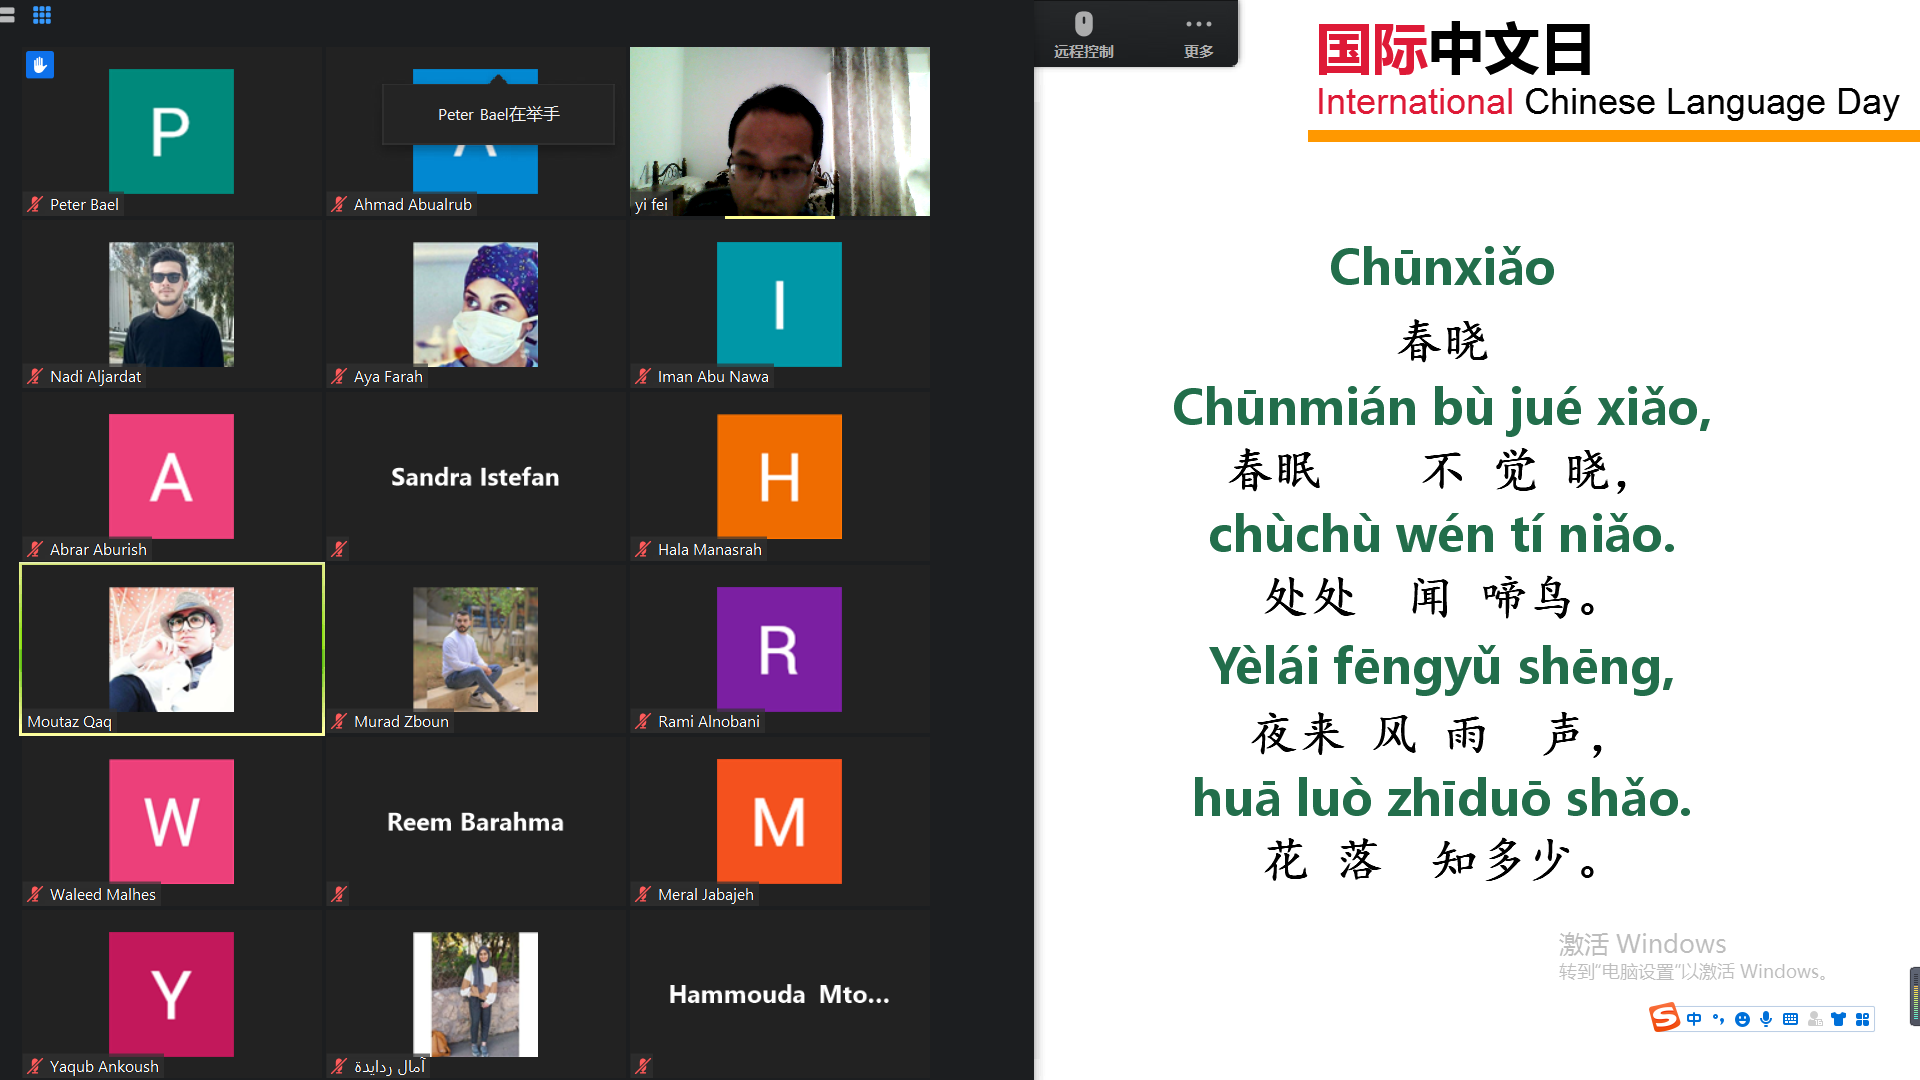 CIAQU holds online activities to celebrate the UN Chinese Language Day